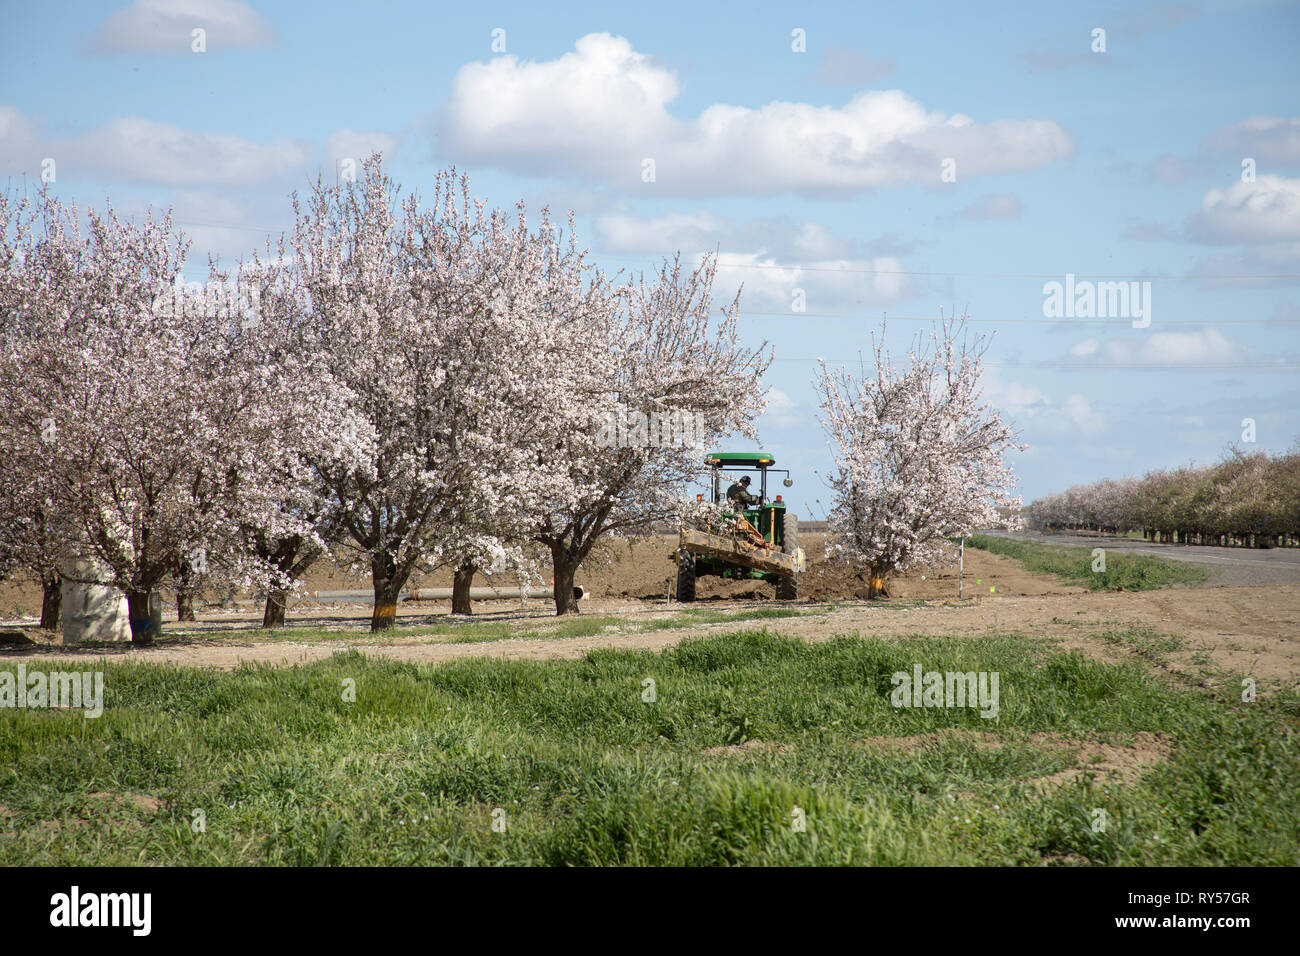 Almond Grove in California with blue sky and tractor Stock Photo